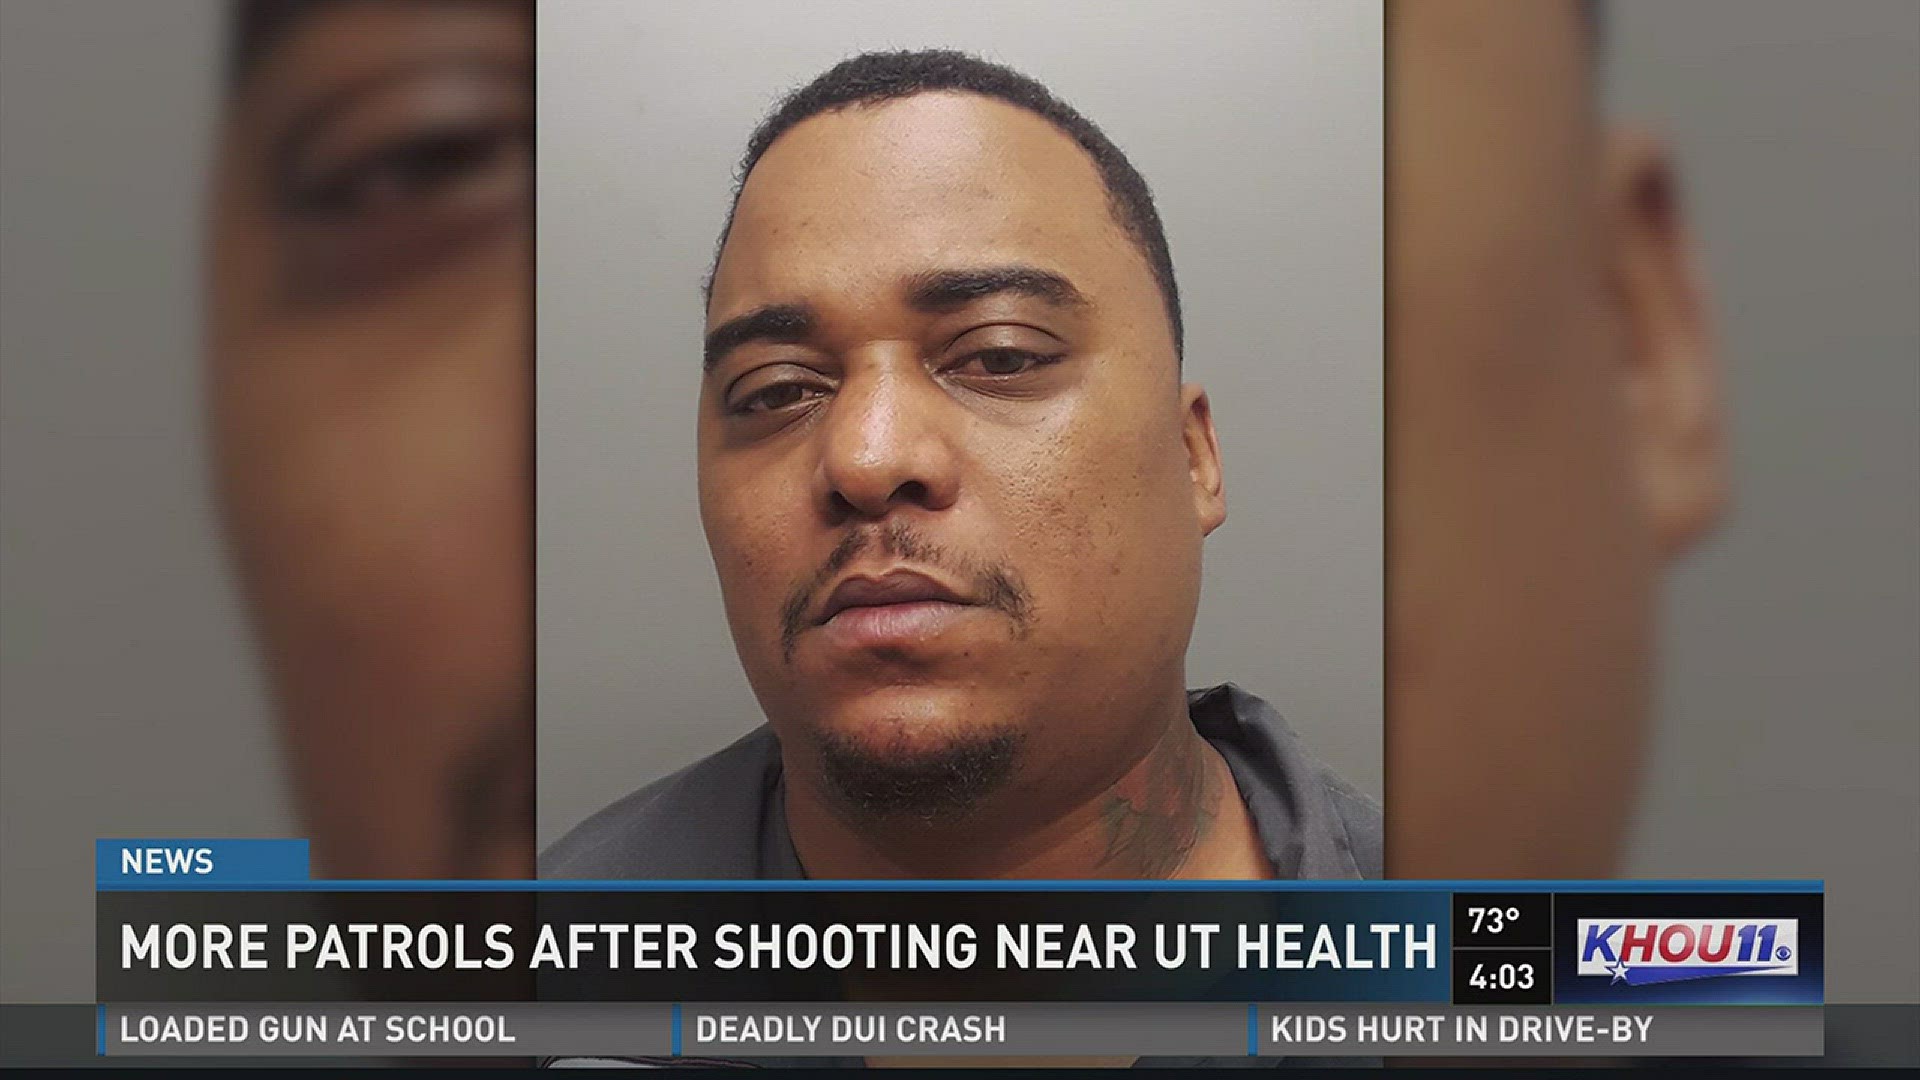 A man is accused of shooting his estranged girlfriend Friday morning near UTHealth in the Medical Center.